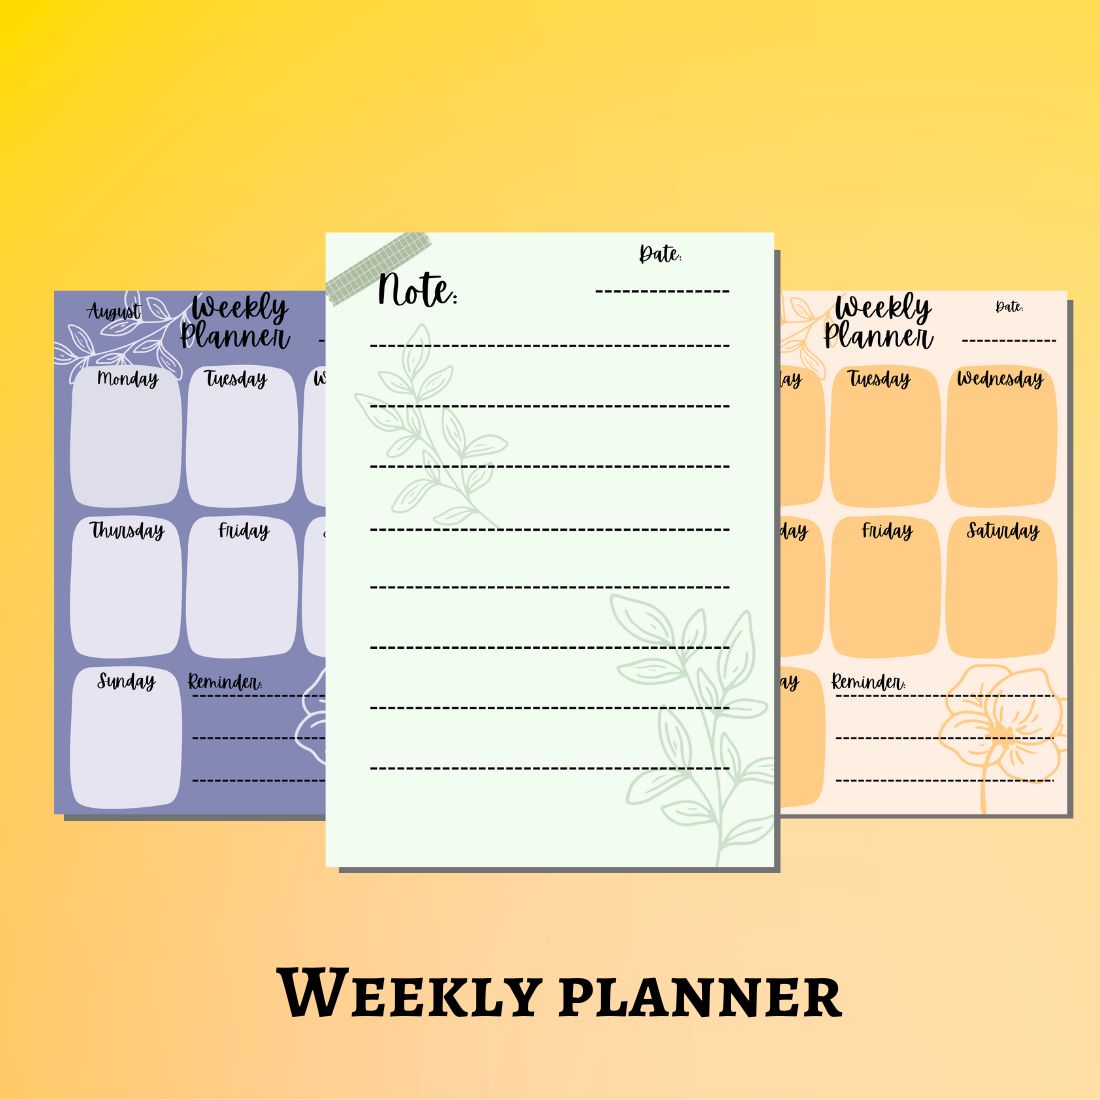 Preview weekly planner for 1 year.